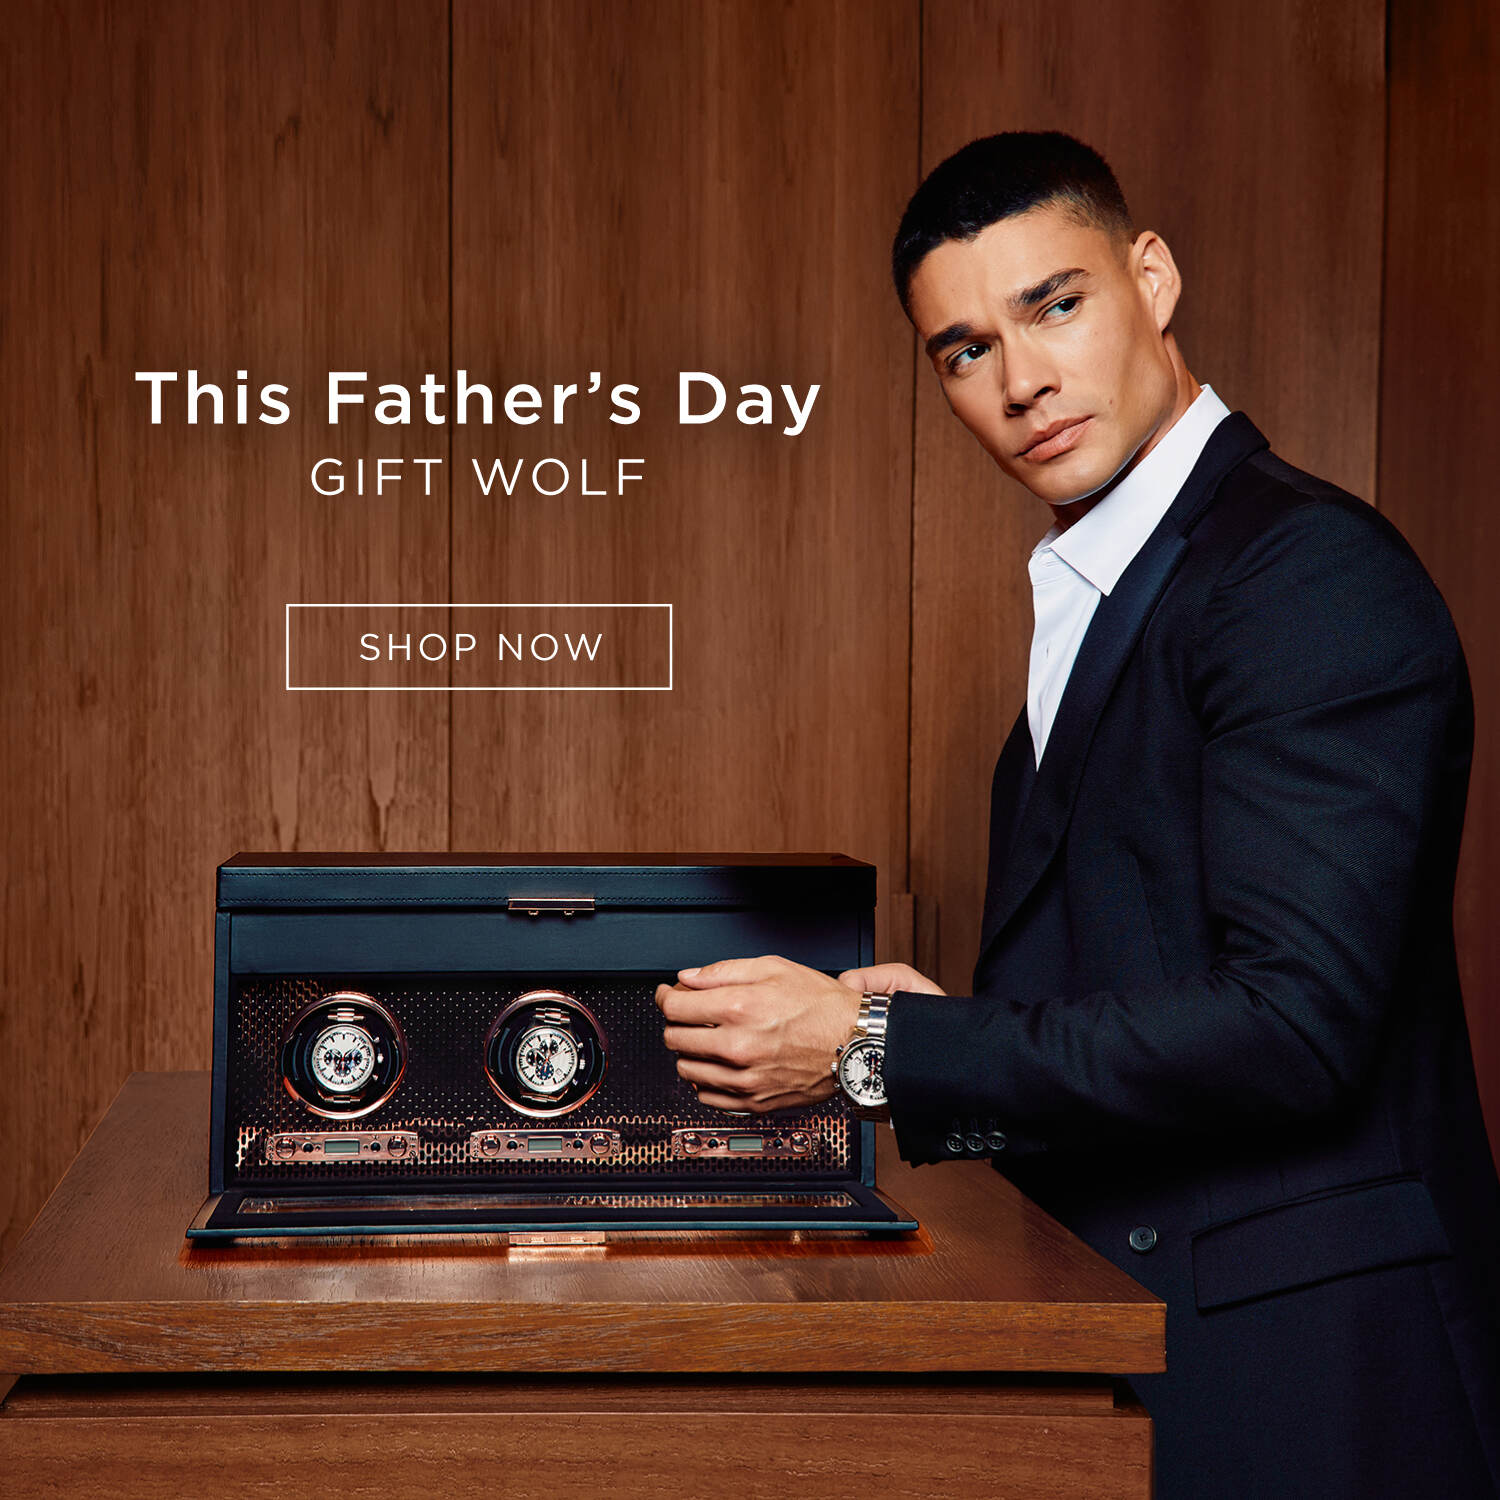 This Father's Day - Gift WOLF